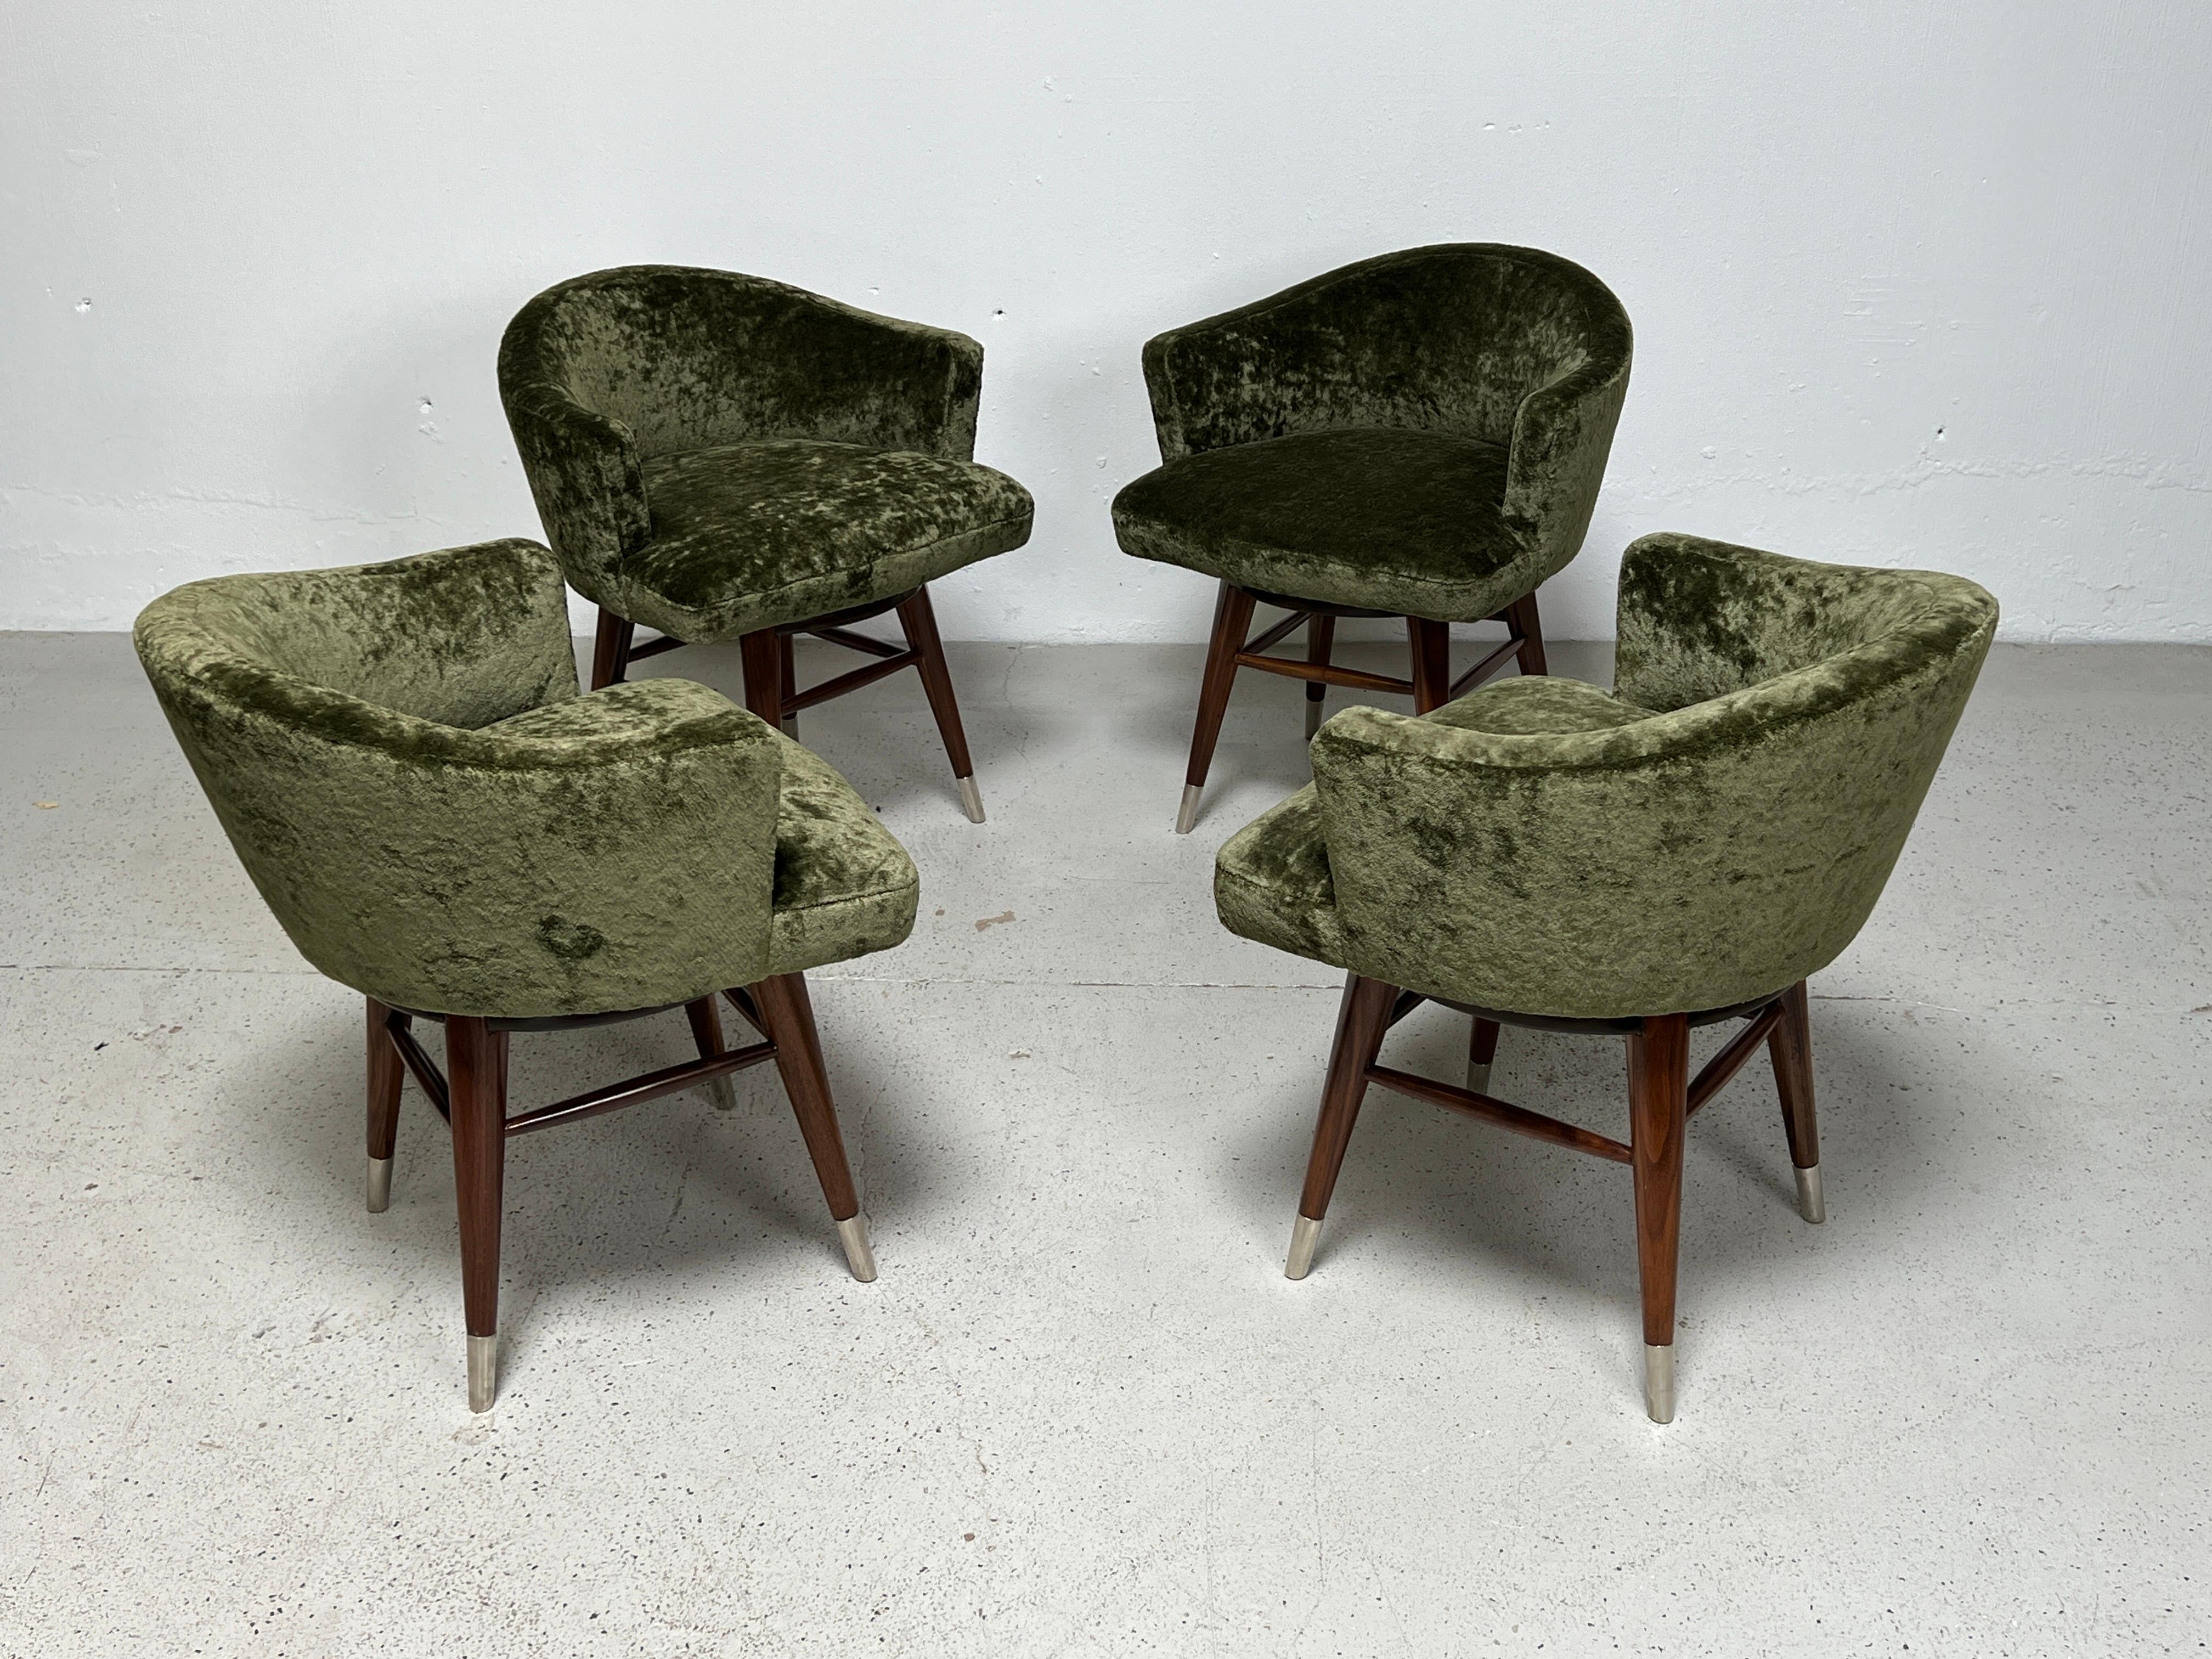 Four Swivel Stools / Chairs by Edward Wormley for Dunbar In Good Condition For Sale In Dallas, TX